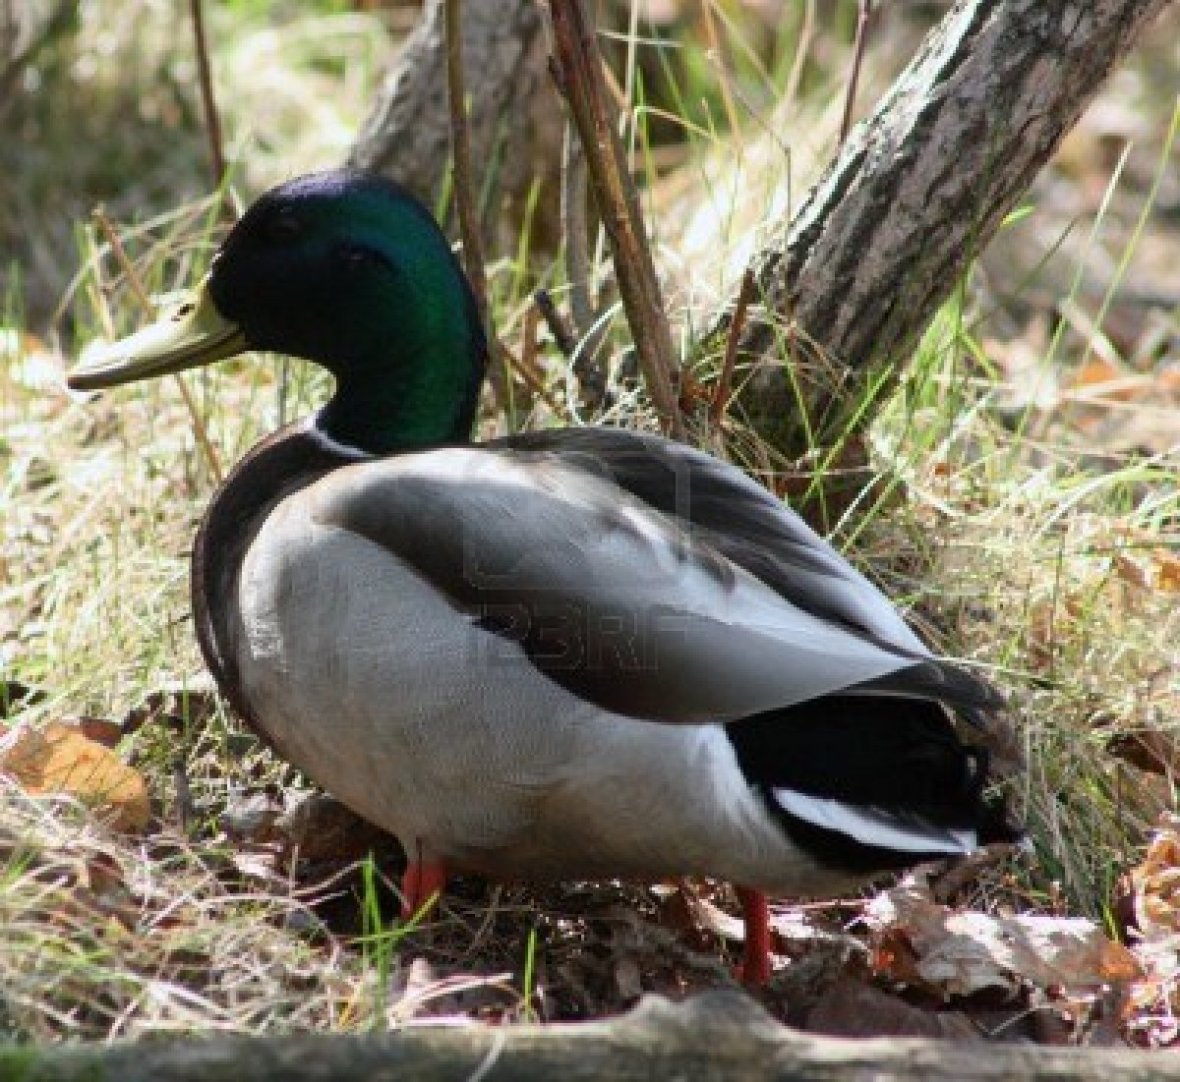 15697516-a-male-mallard-duck-standing-next-to-a-tree-in-a-forest-in-spring-in-winnipeg-manitoba-canada